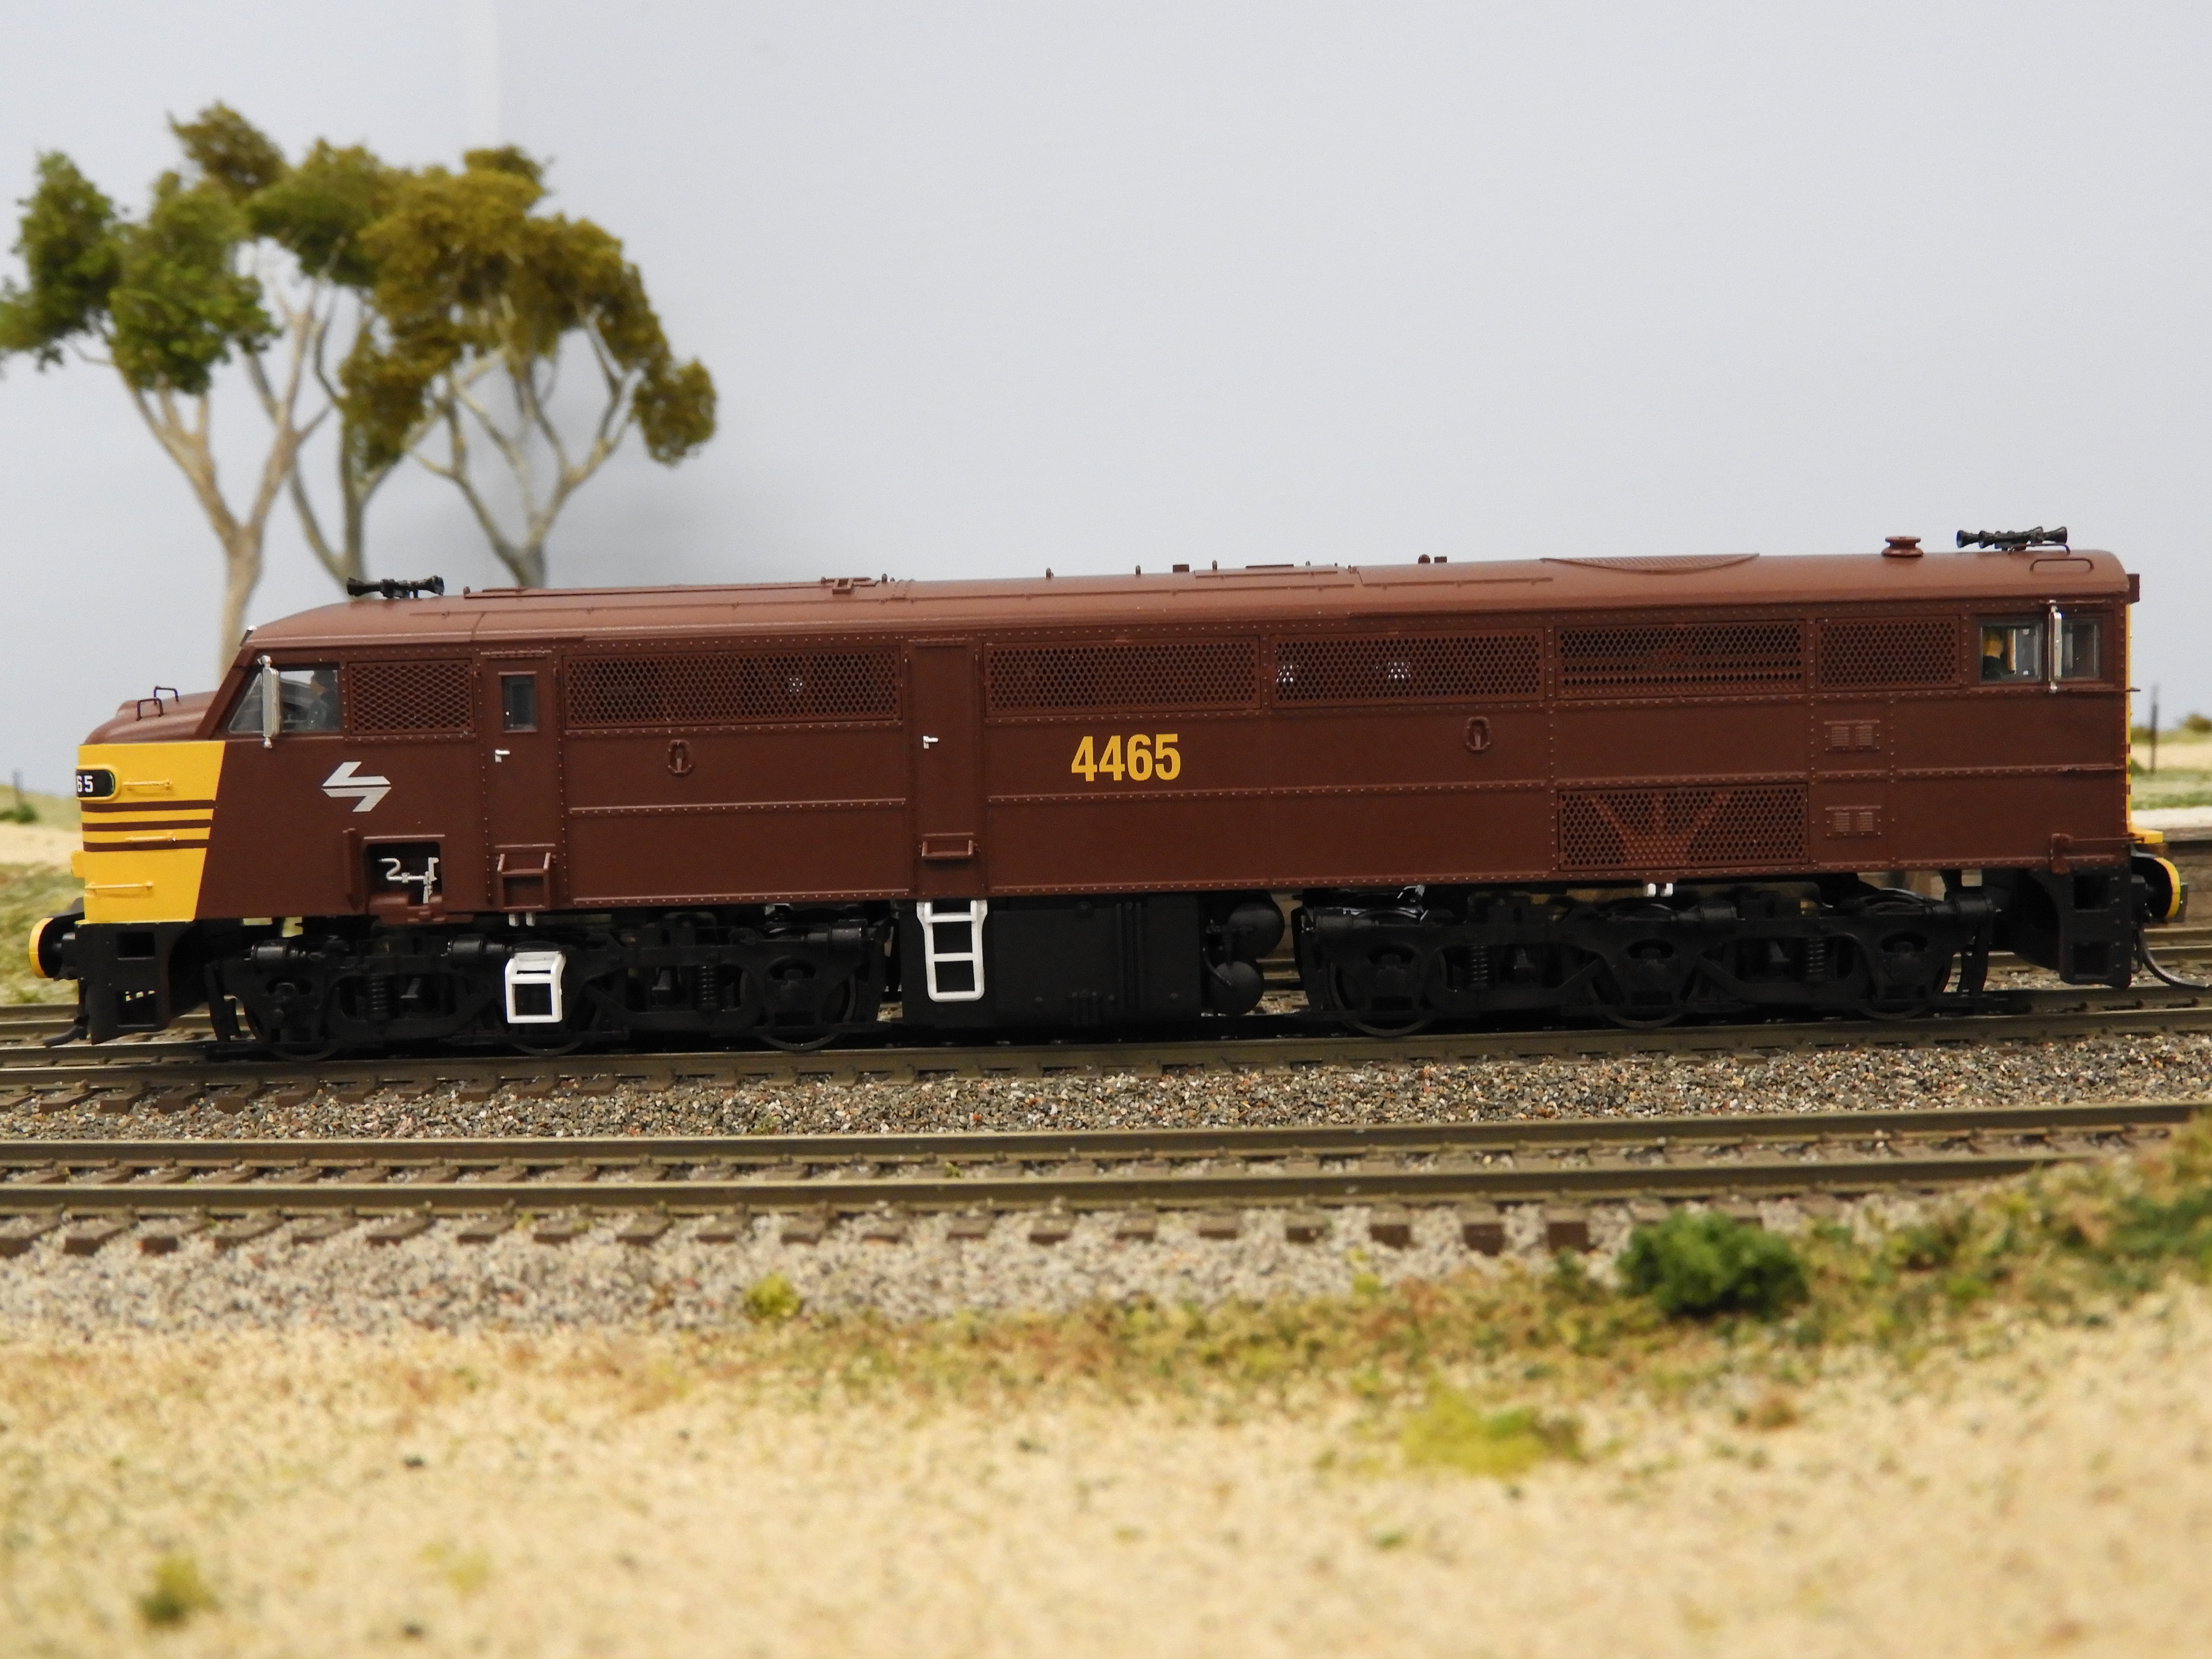 NSW 44 CLASS HO SCALE - 4465 (YELLOW FACE) - $295